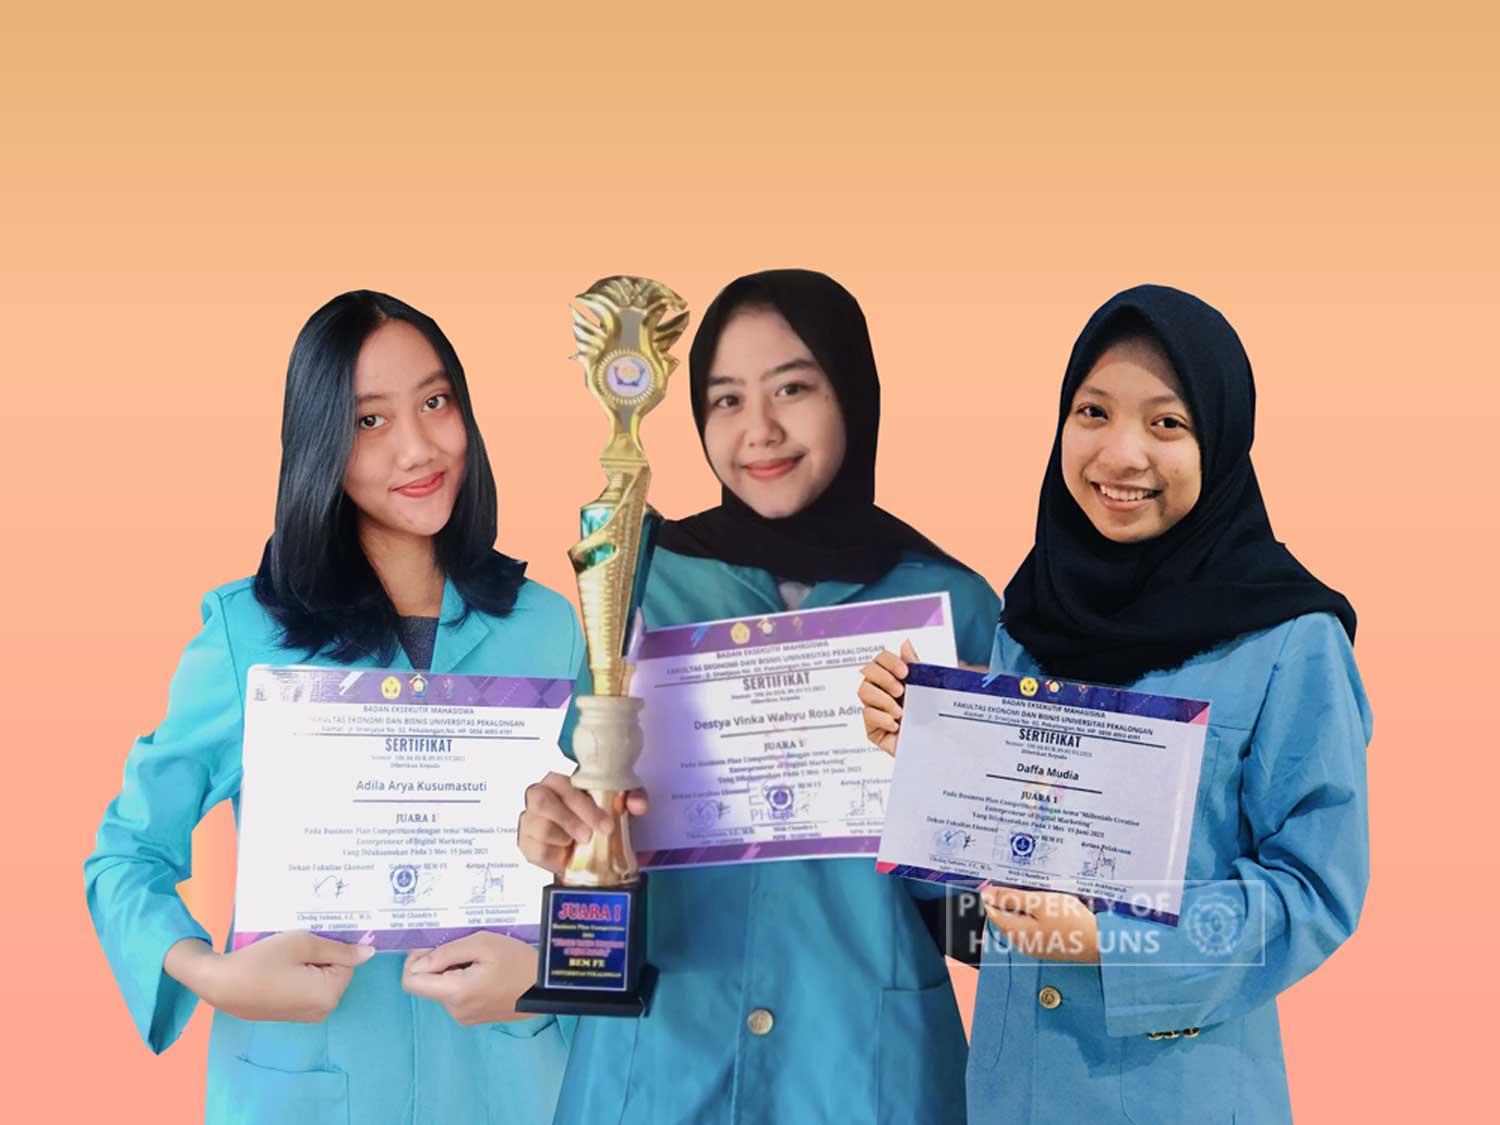 Develop Digital Invitation Business Idea; Three UNS Students Won 1st Place in Business Plan Competition